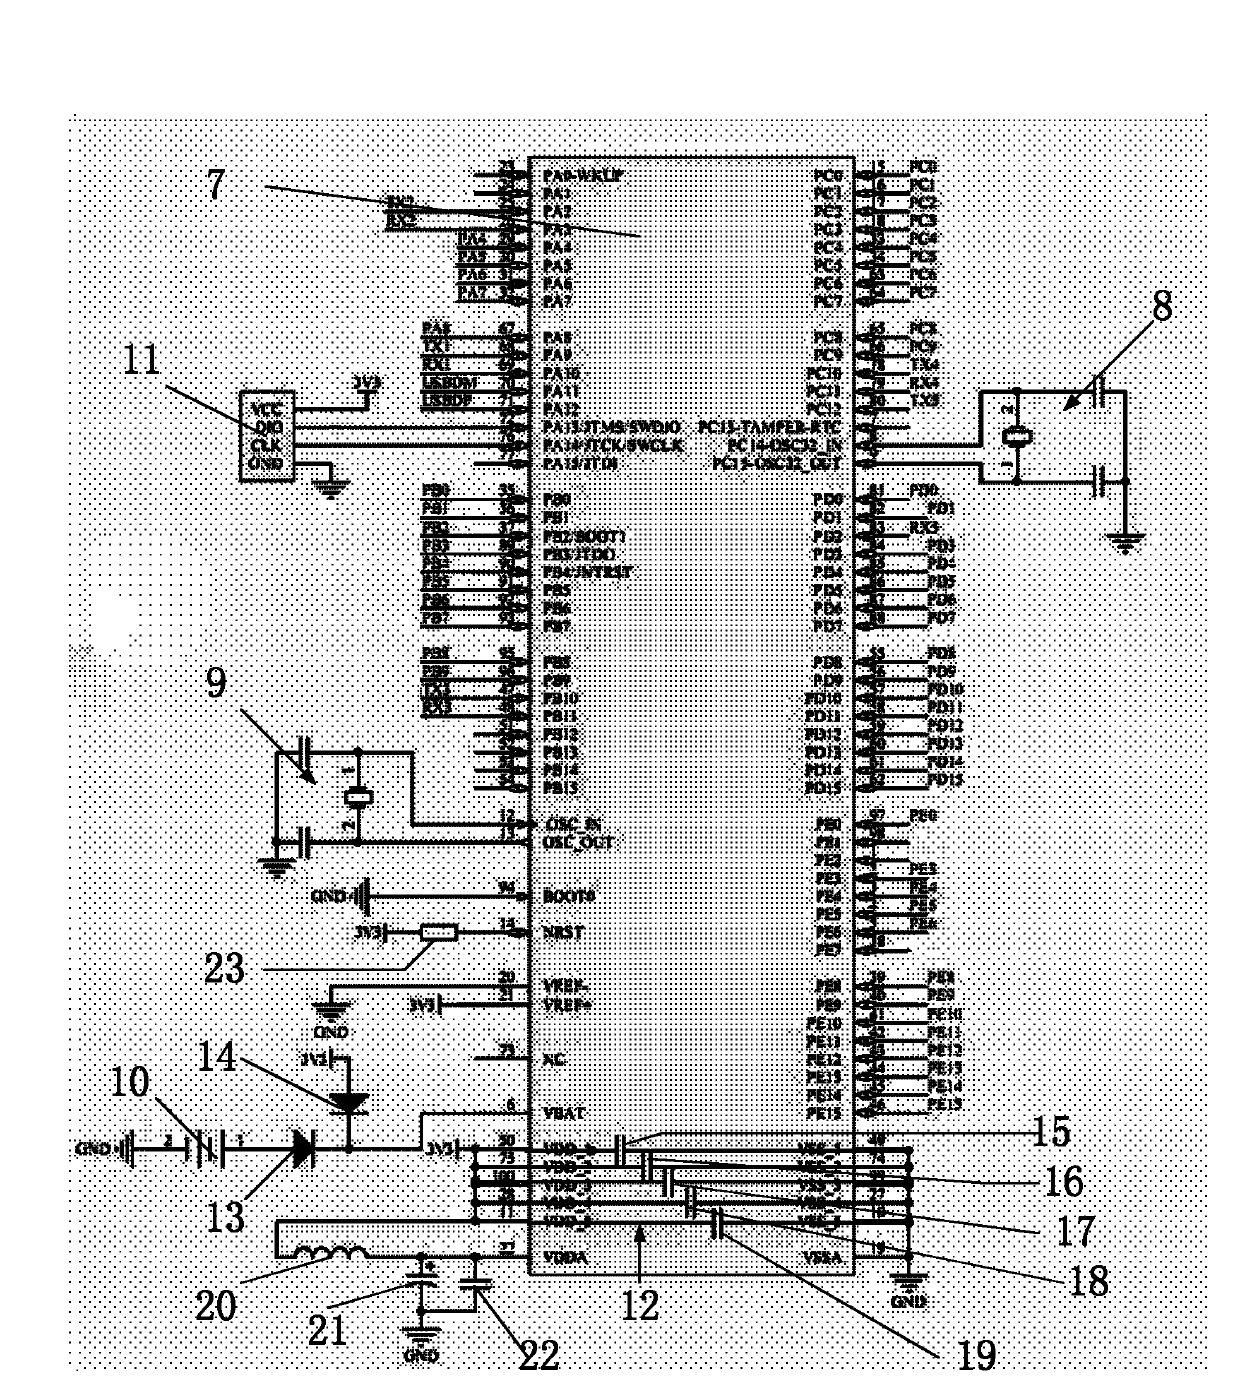 Advanced-reduced-instruction-set-computer(RISC)-machine(ARM)-based self-organization anti-collision device for tower crane